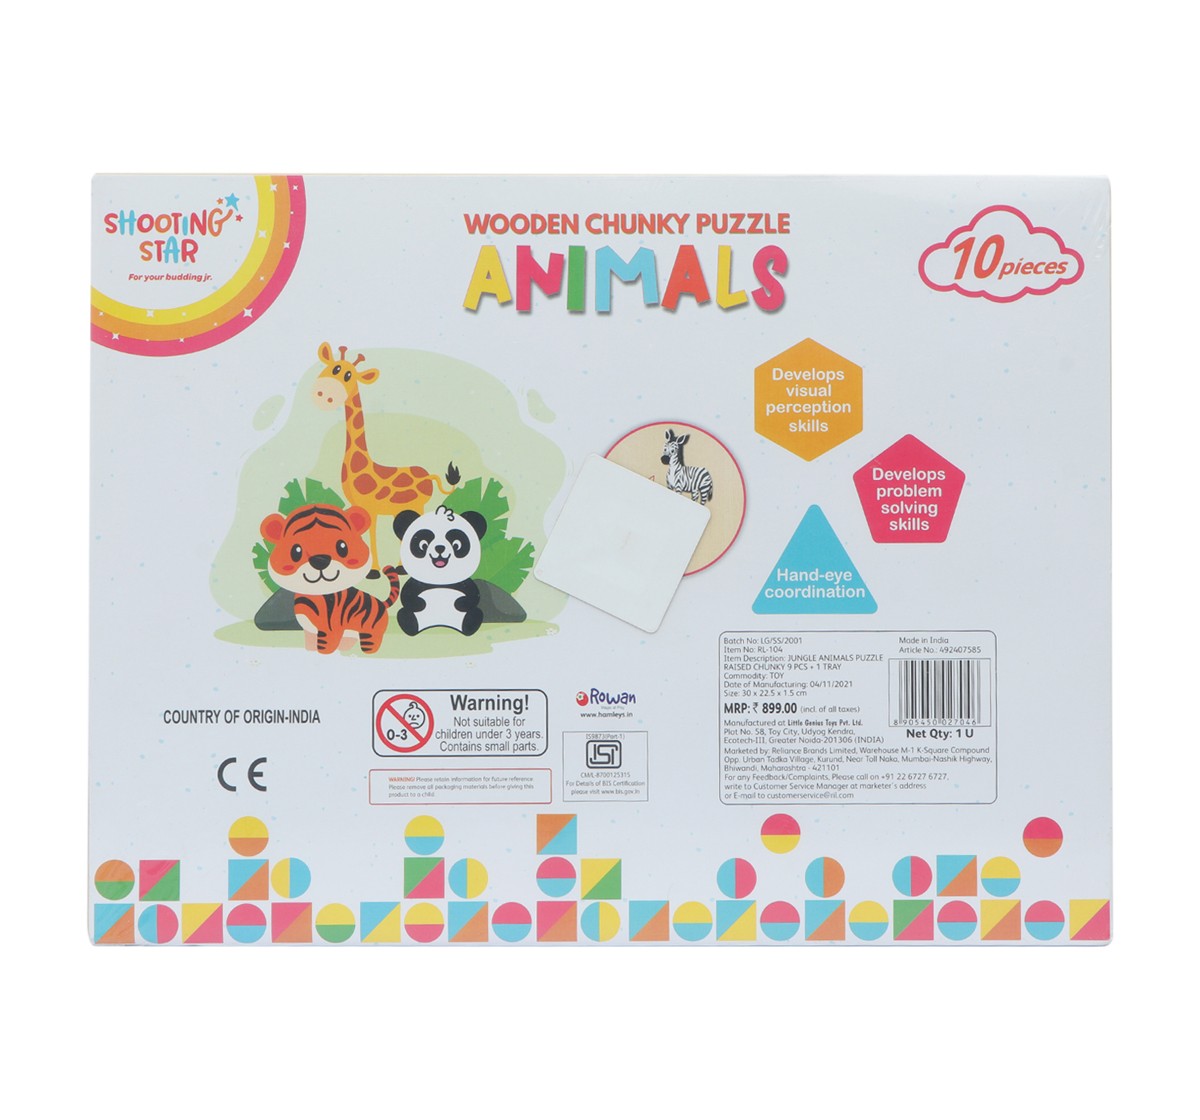 Shooting Star Jungle Animals Puzzle Raised Chunky Multicolour 3Y+